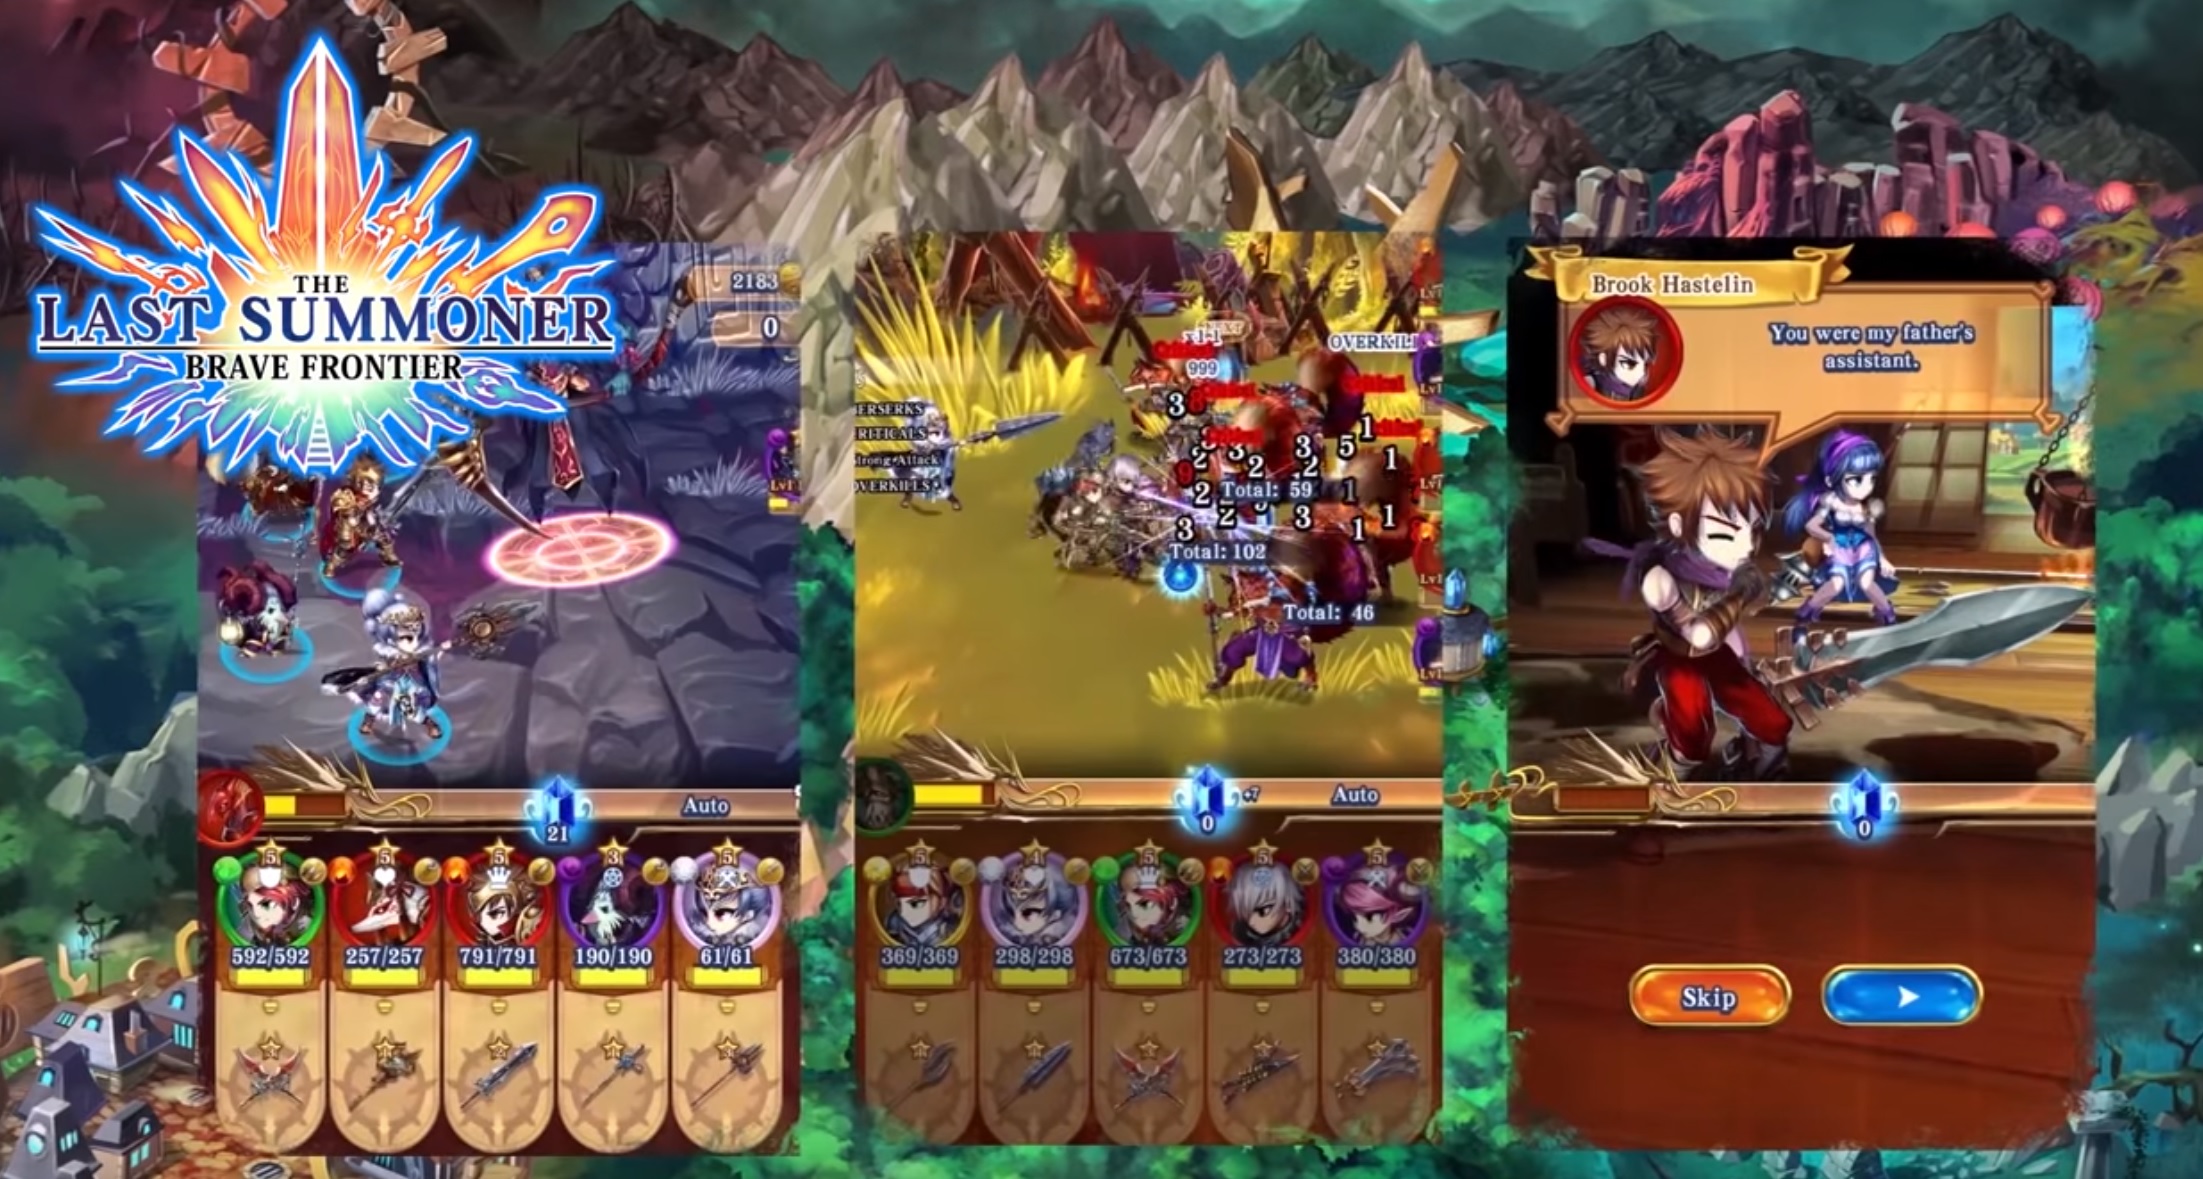 Gameplay images of Brave Frontier: The Last Summoner on Android.